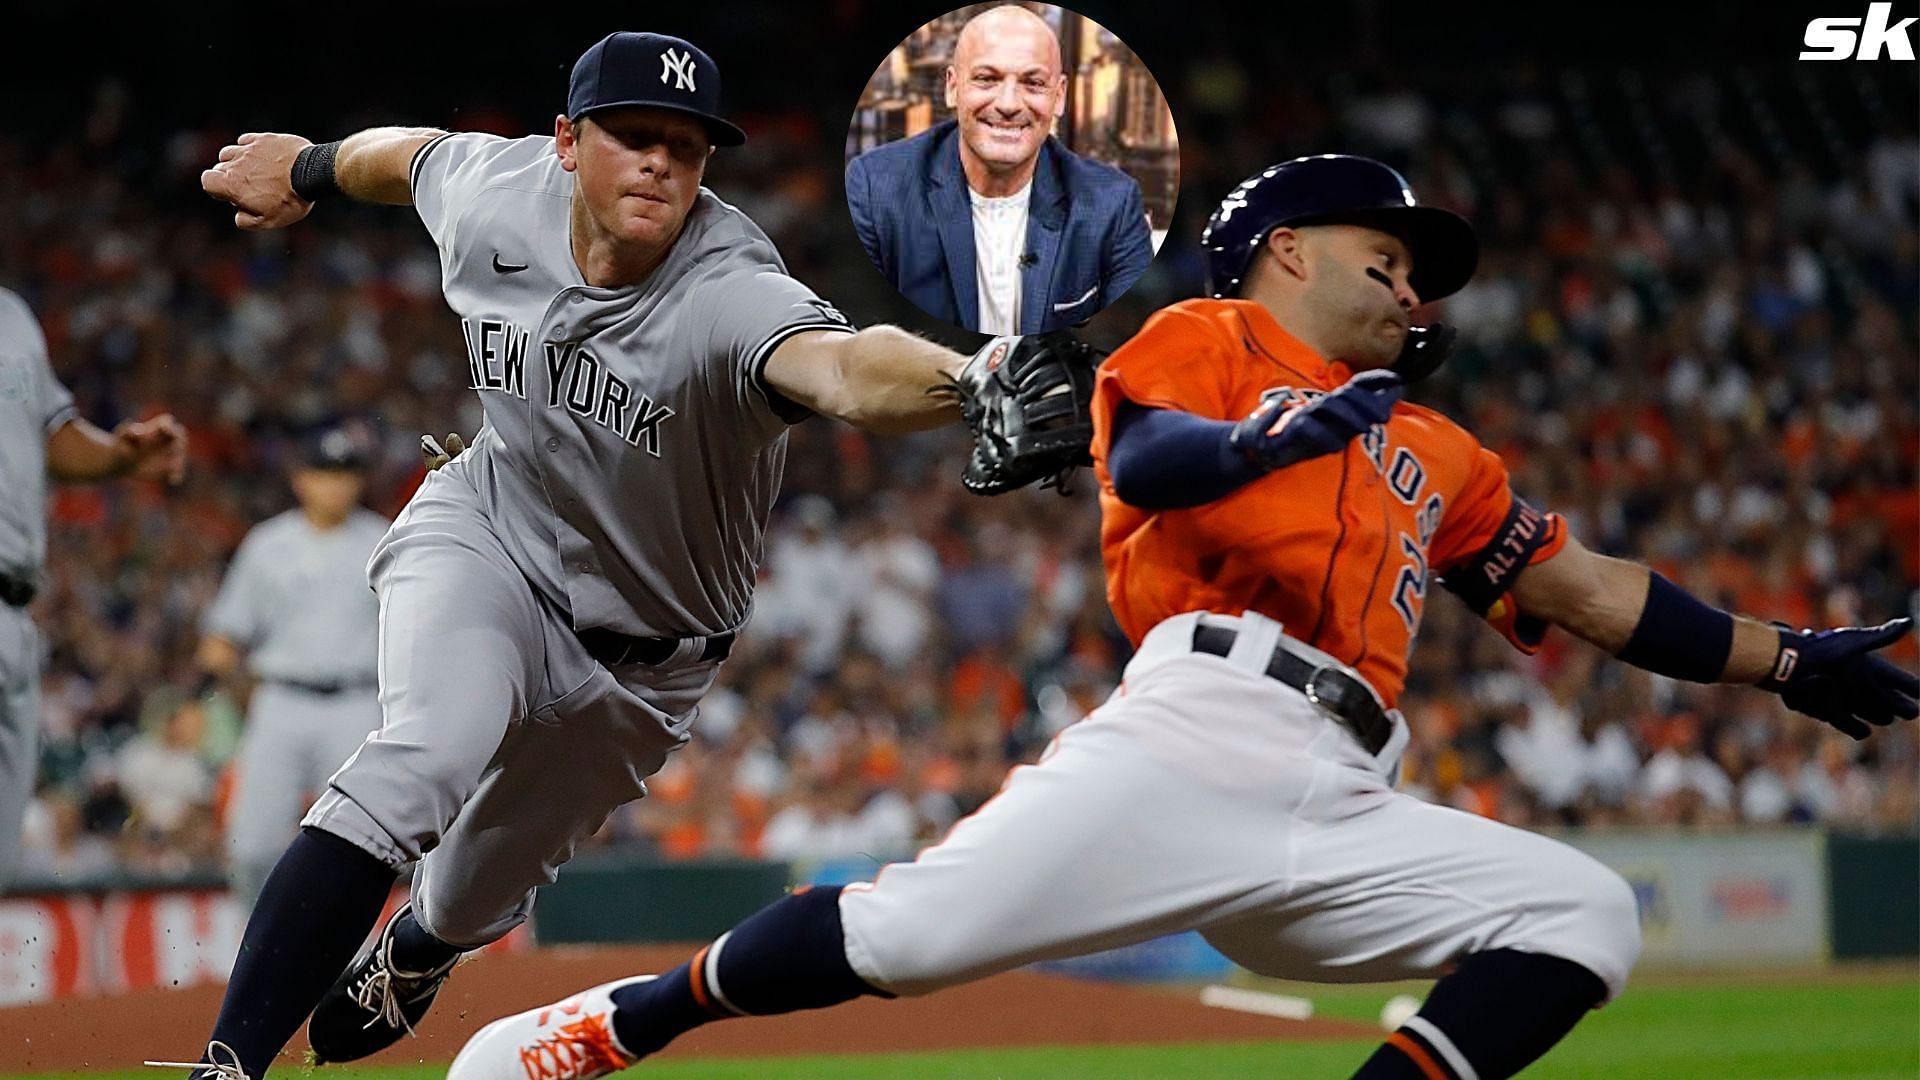 DJ LeMahieu of the New York Yankees reaches to tag Jose Altuve of the Houston Astros